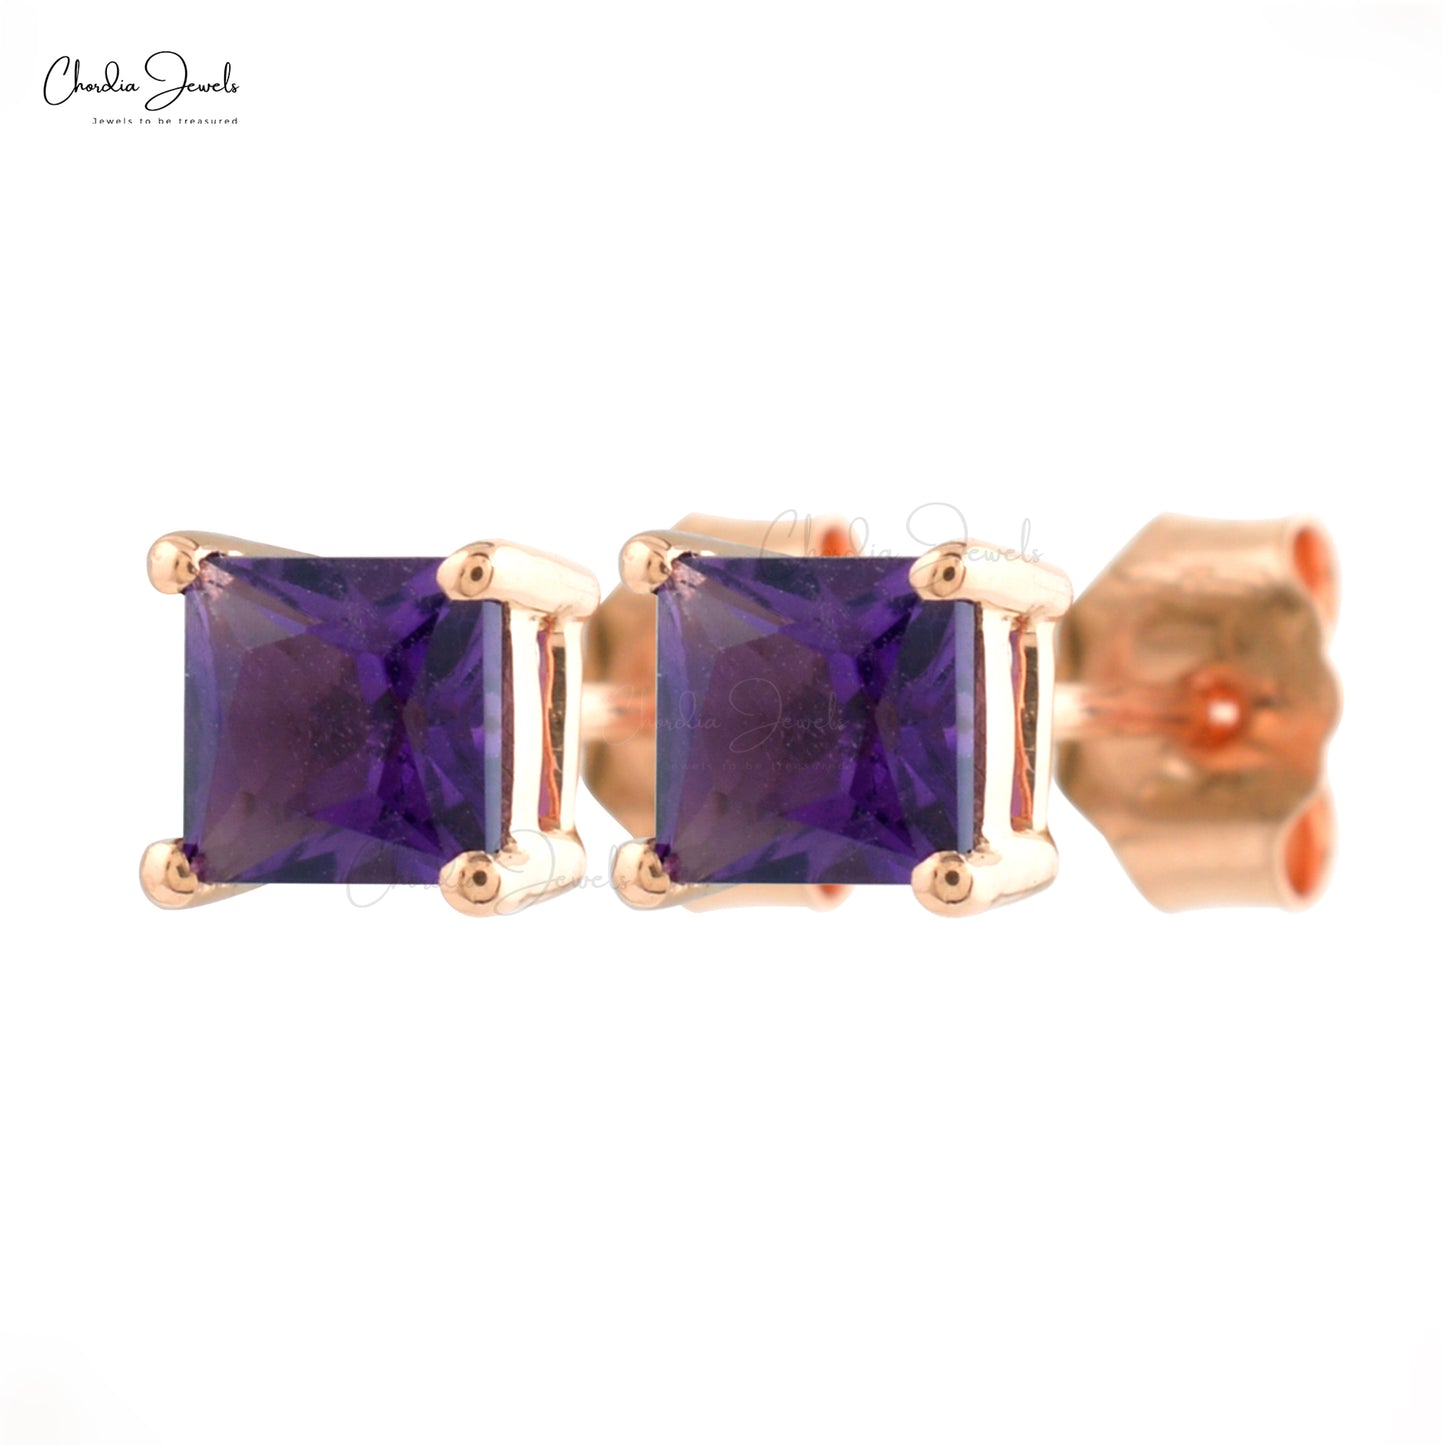 Natural Amethyst Gemstone Square Studs in 14k Rose Gold February Birthstone Solitaire Studs